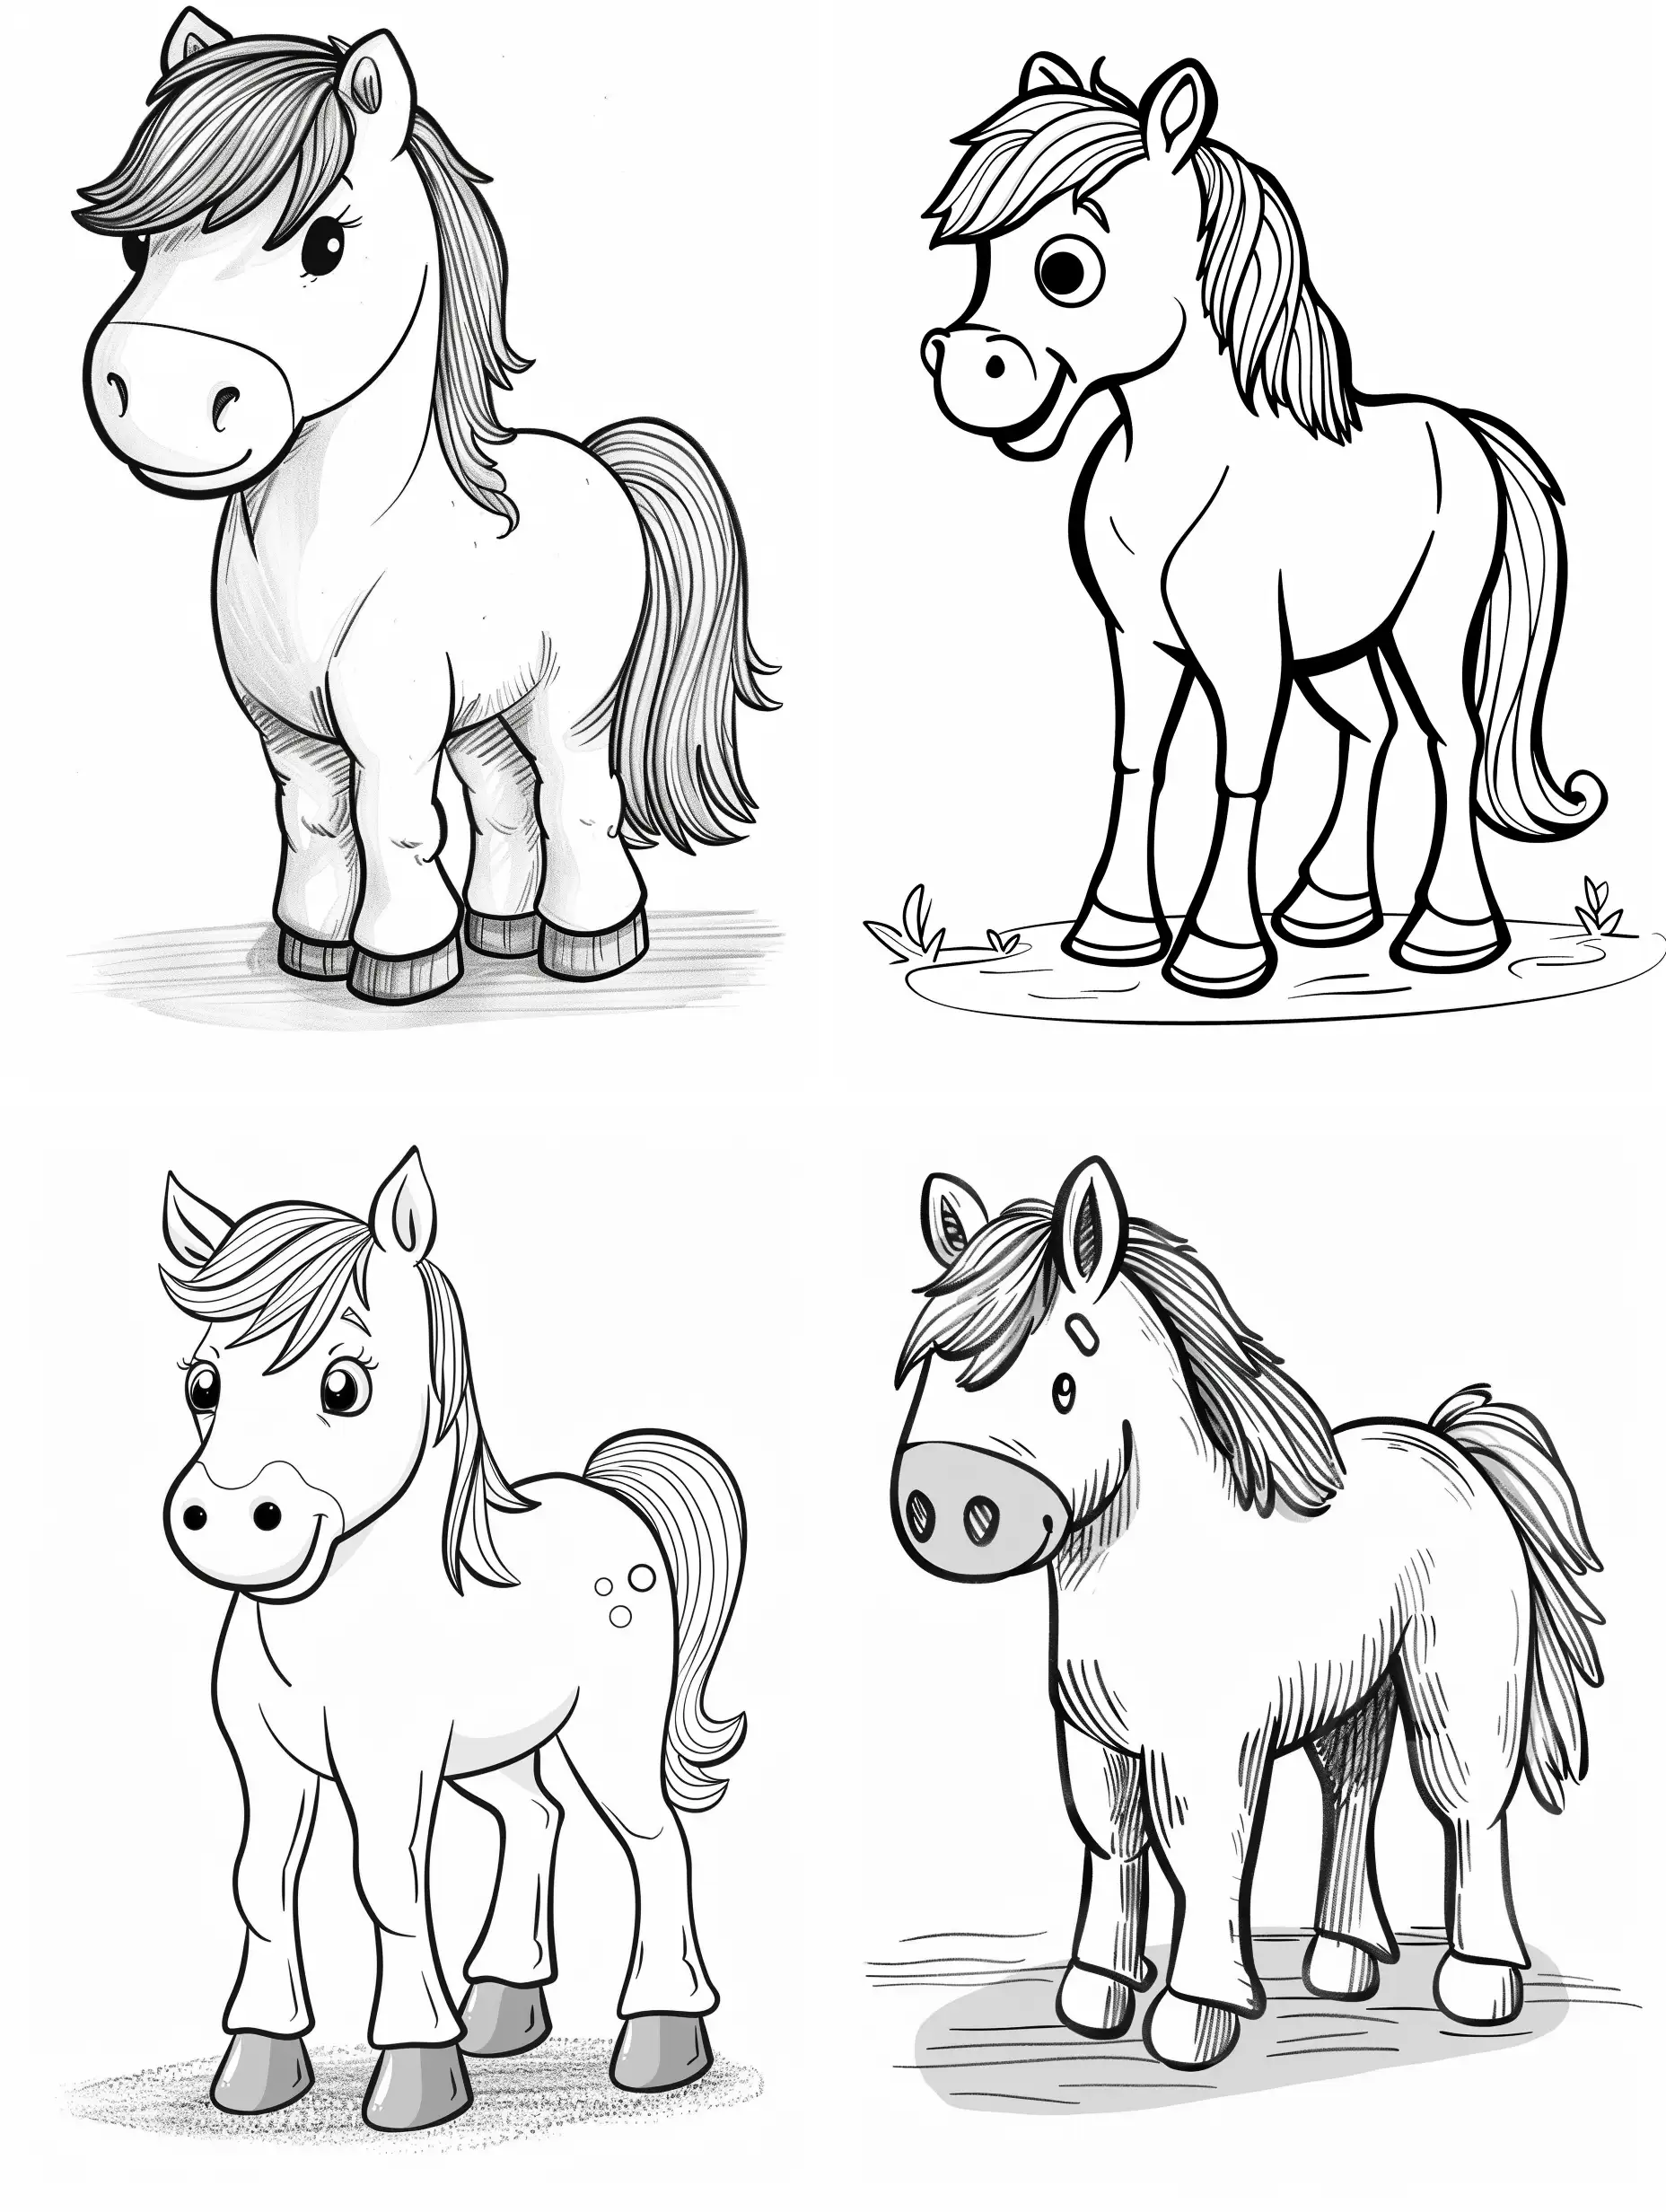 Adorable-Horse-Coloring-Page-for-Kids-Simple-and-Cute-Illustration-on-White-Background